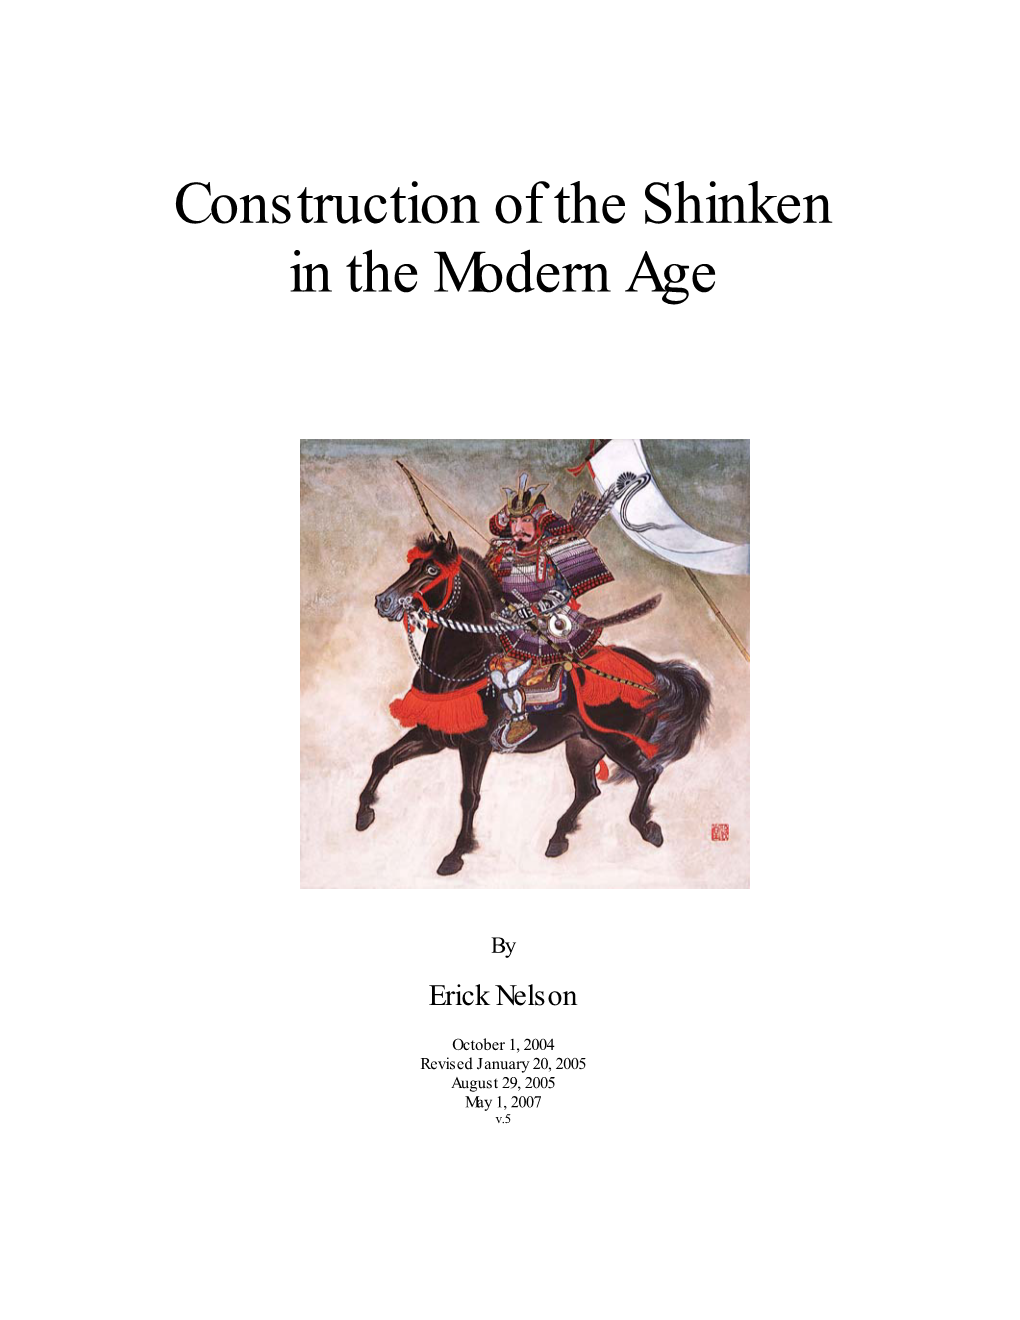 Construction of the Shinken in the Modern Age